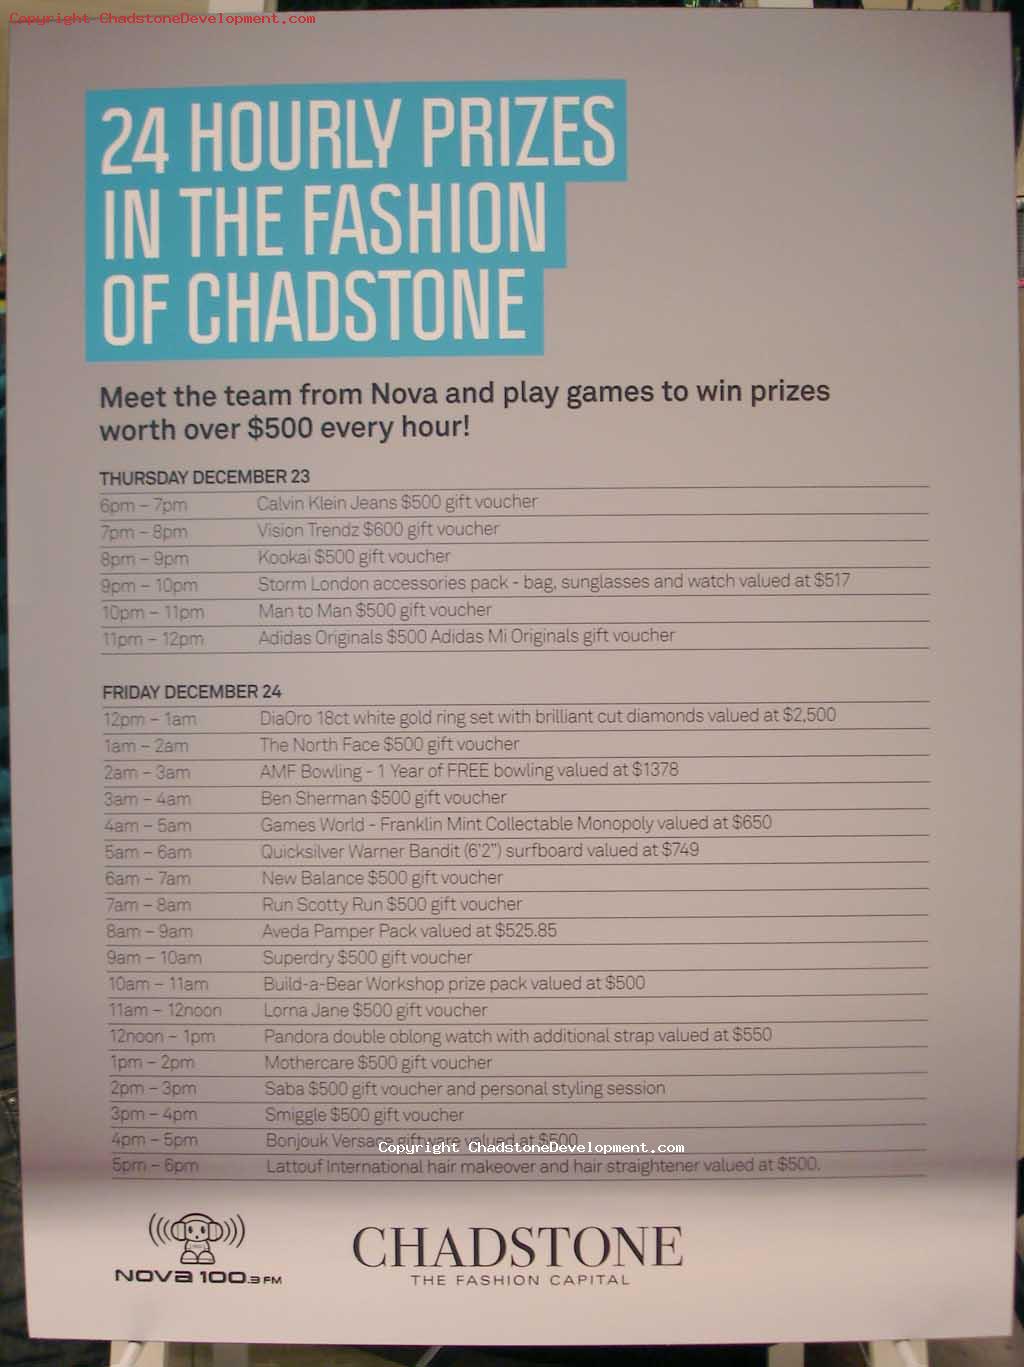 Nova 24 Hourly Prizes in the Fashion of Chadstone - Chadstone Development Discussions